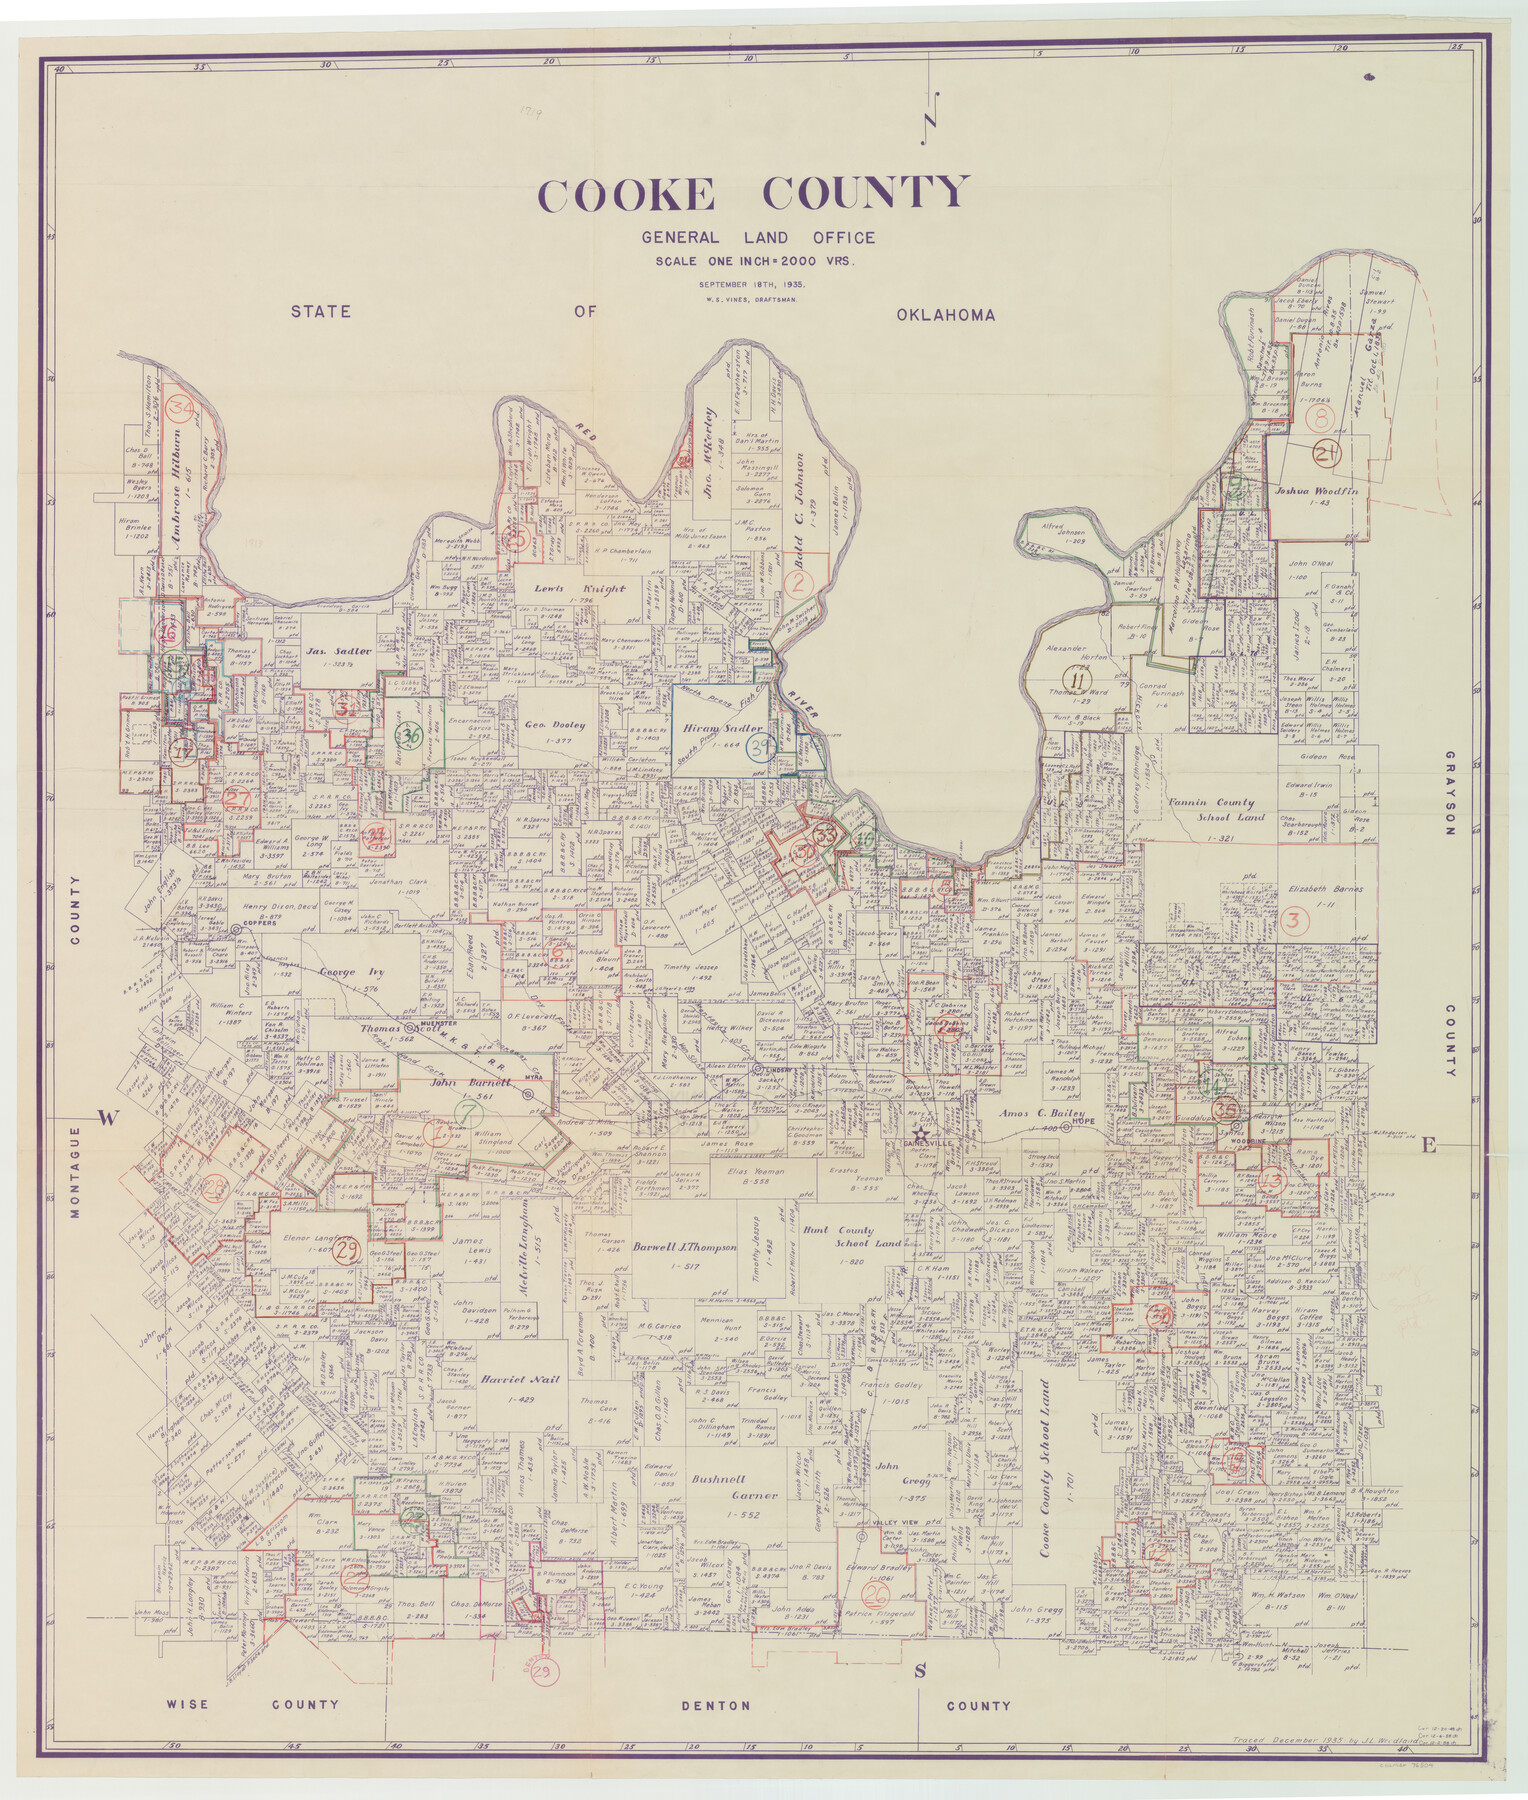 76504, Cooke County Working Sketch Graphic Index, General Map Collection